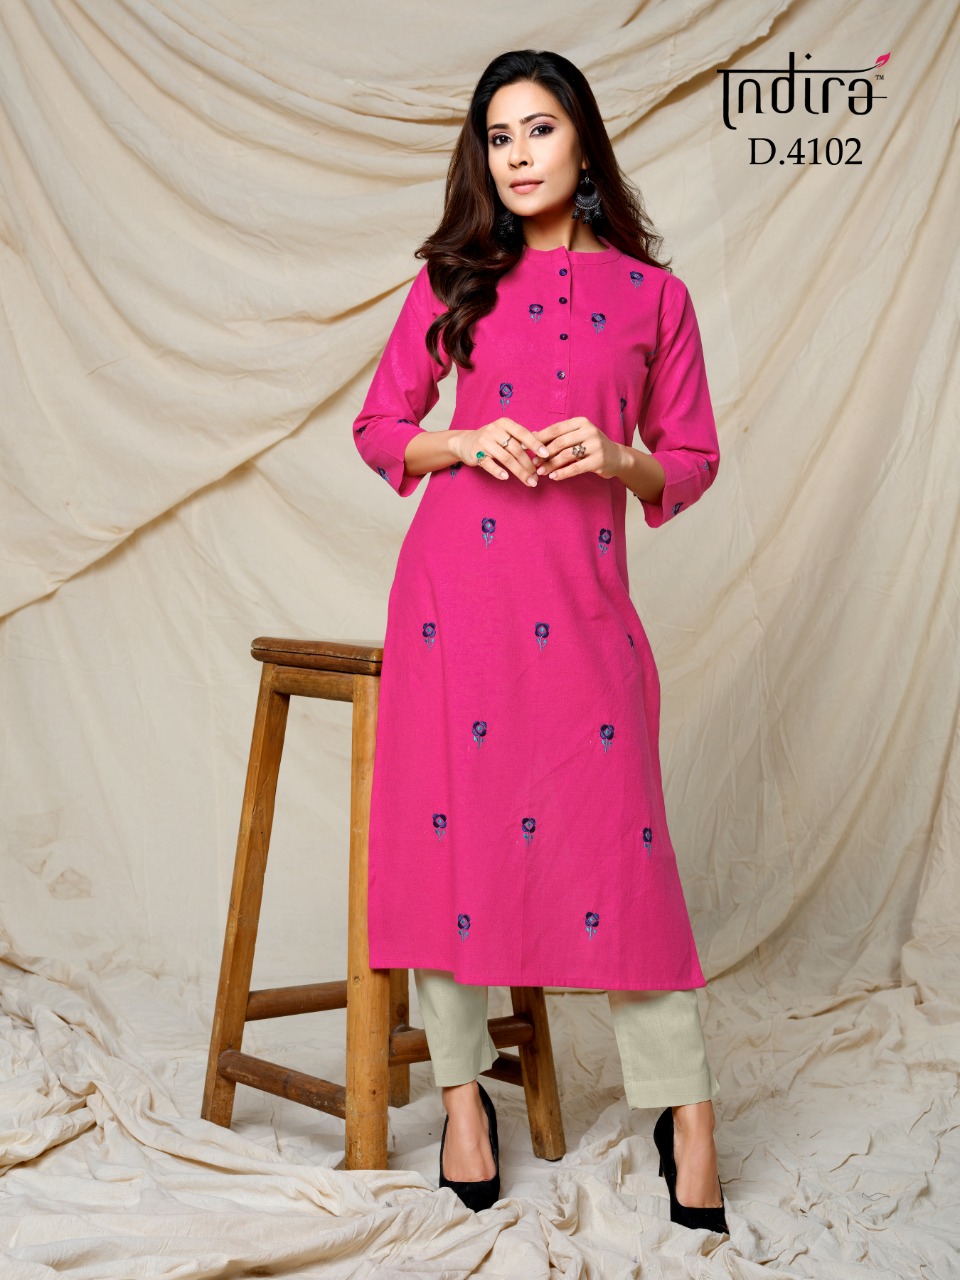 Indira Apparel's Finesse One Piece Collection Designer Woven Cotton With Embroidery Work Kurtis Wholesale